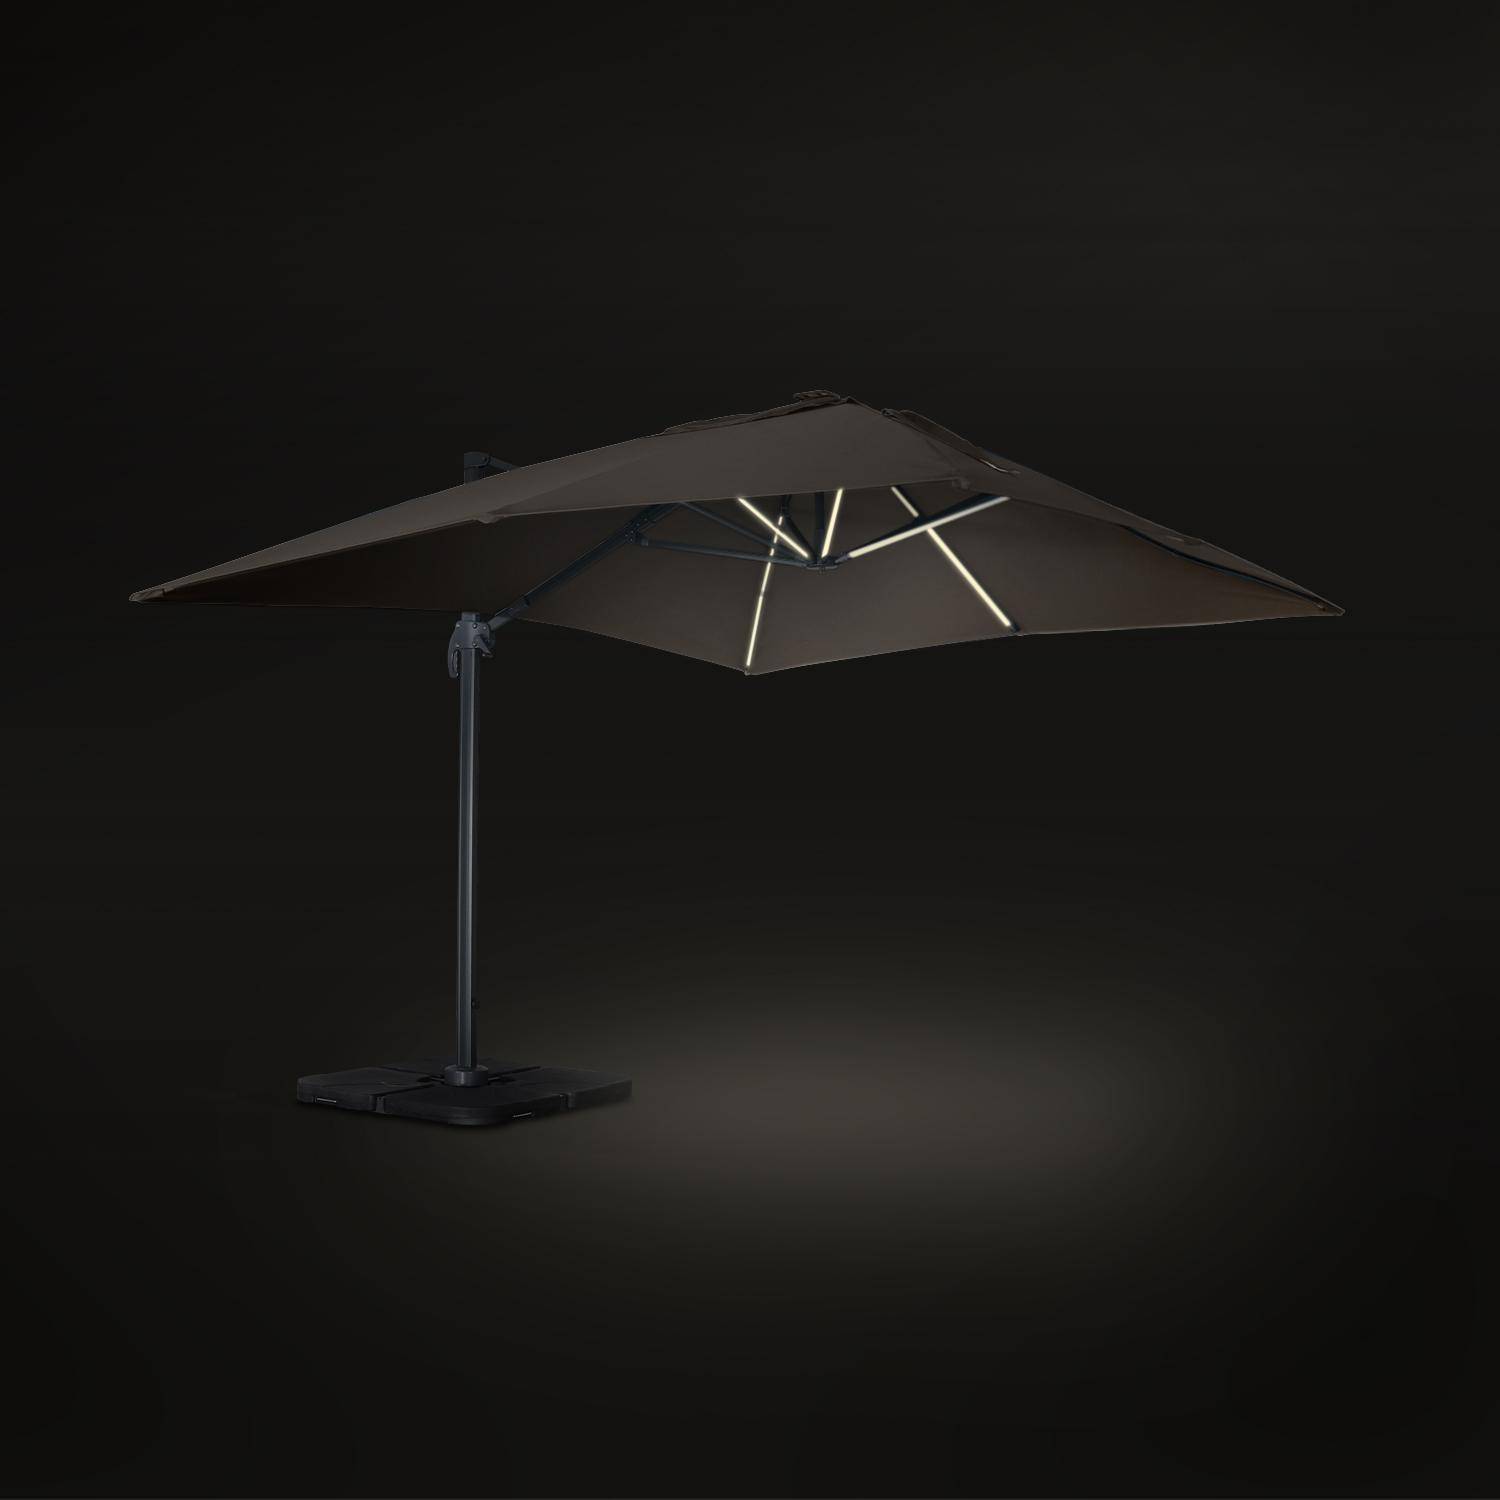 Premium rectangular 3x4m cantilever parasol with solar-powered integrated LED lights - Cantilever parasol, tiltable, foldable with 360° rotation, solar charging, cover included - Luce - Beige-brown Photo4